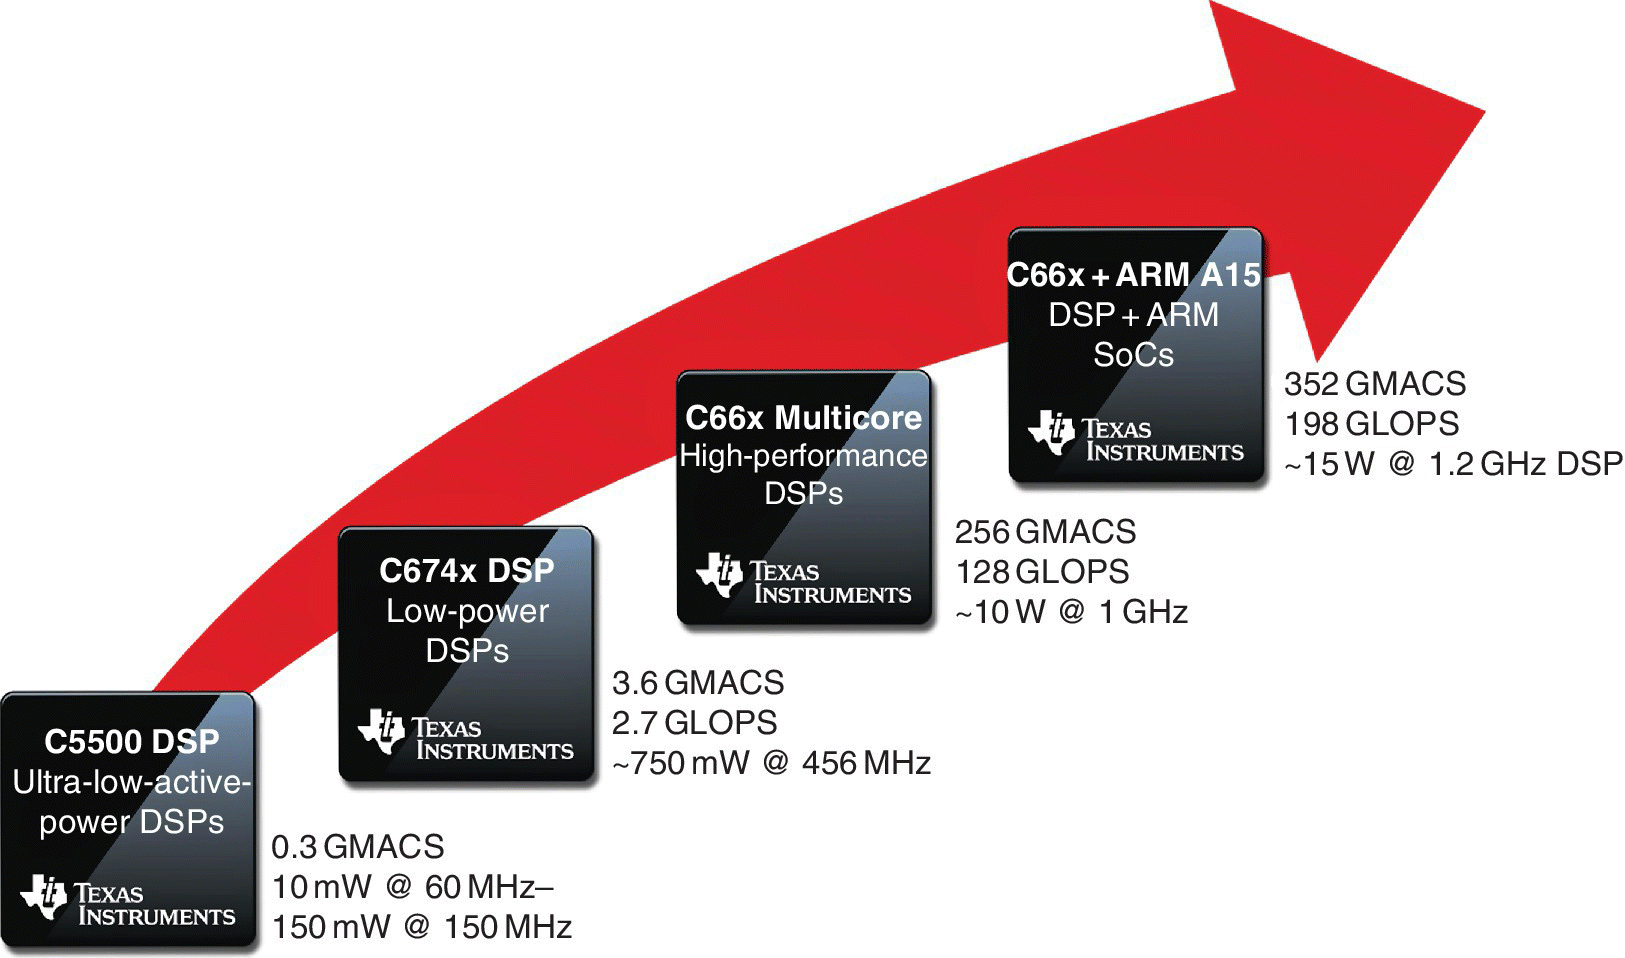 Diagram illustrating a right-skewed arrow of Texas instruments (TI) digital signal processor (DSP), namely, C5500 DSP, C674x DSP, C66x multicore, and C66x +ARM A15 DSP+ARM SoCs.